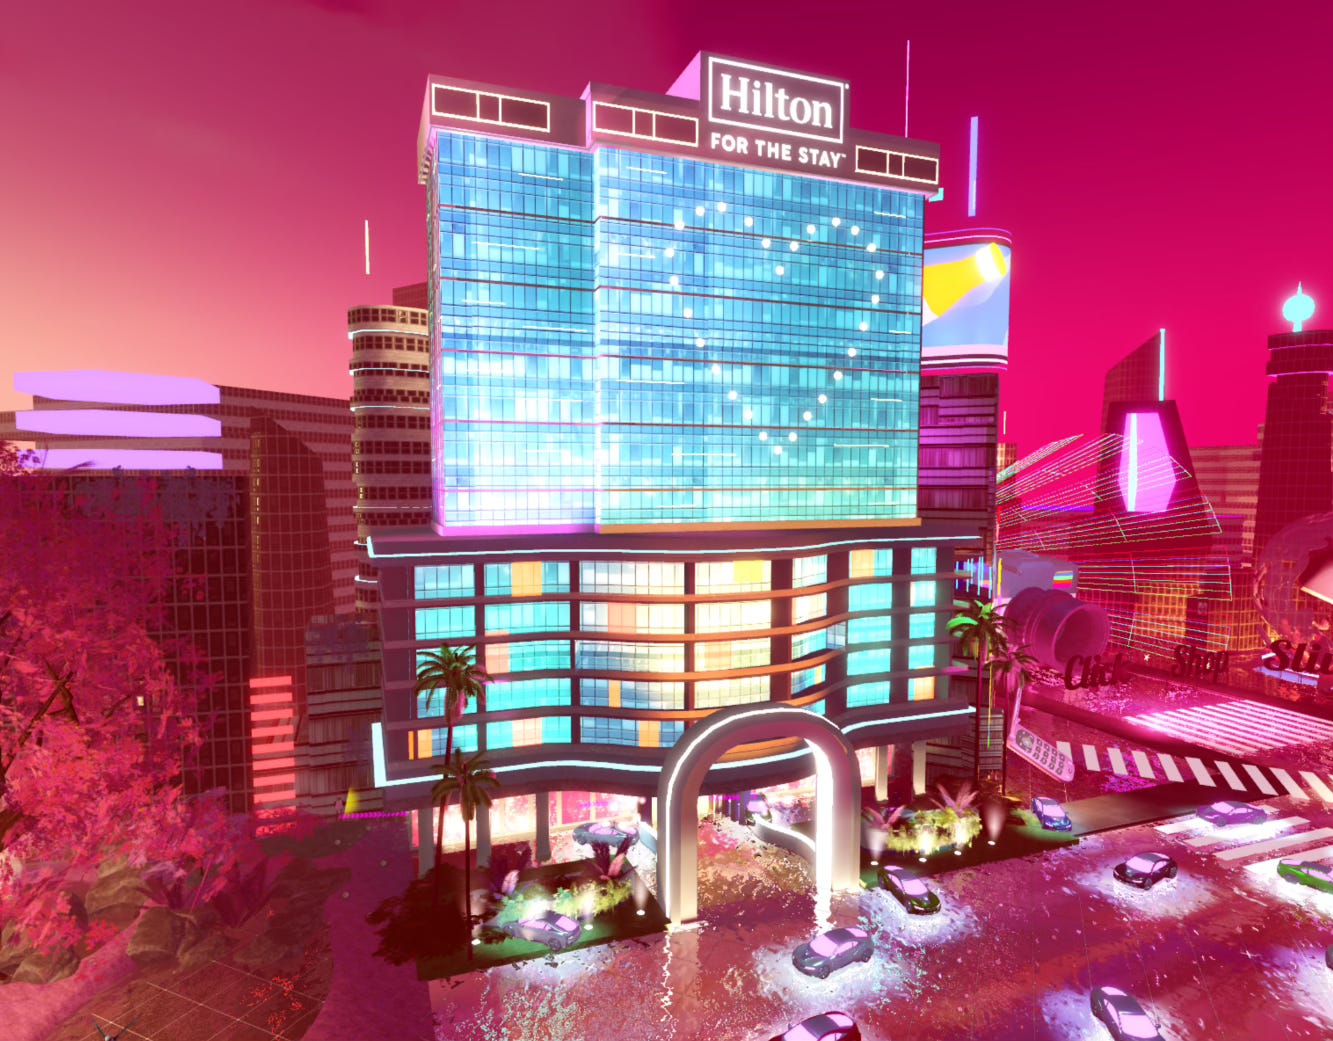 Exterior view of the Hilton hotel in the Slivingland Roblox experience